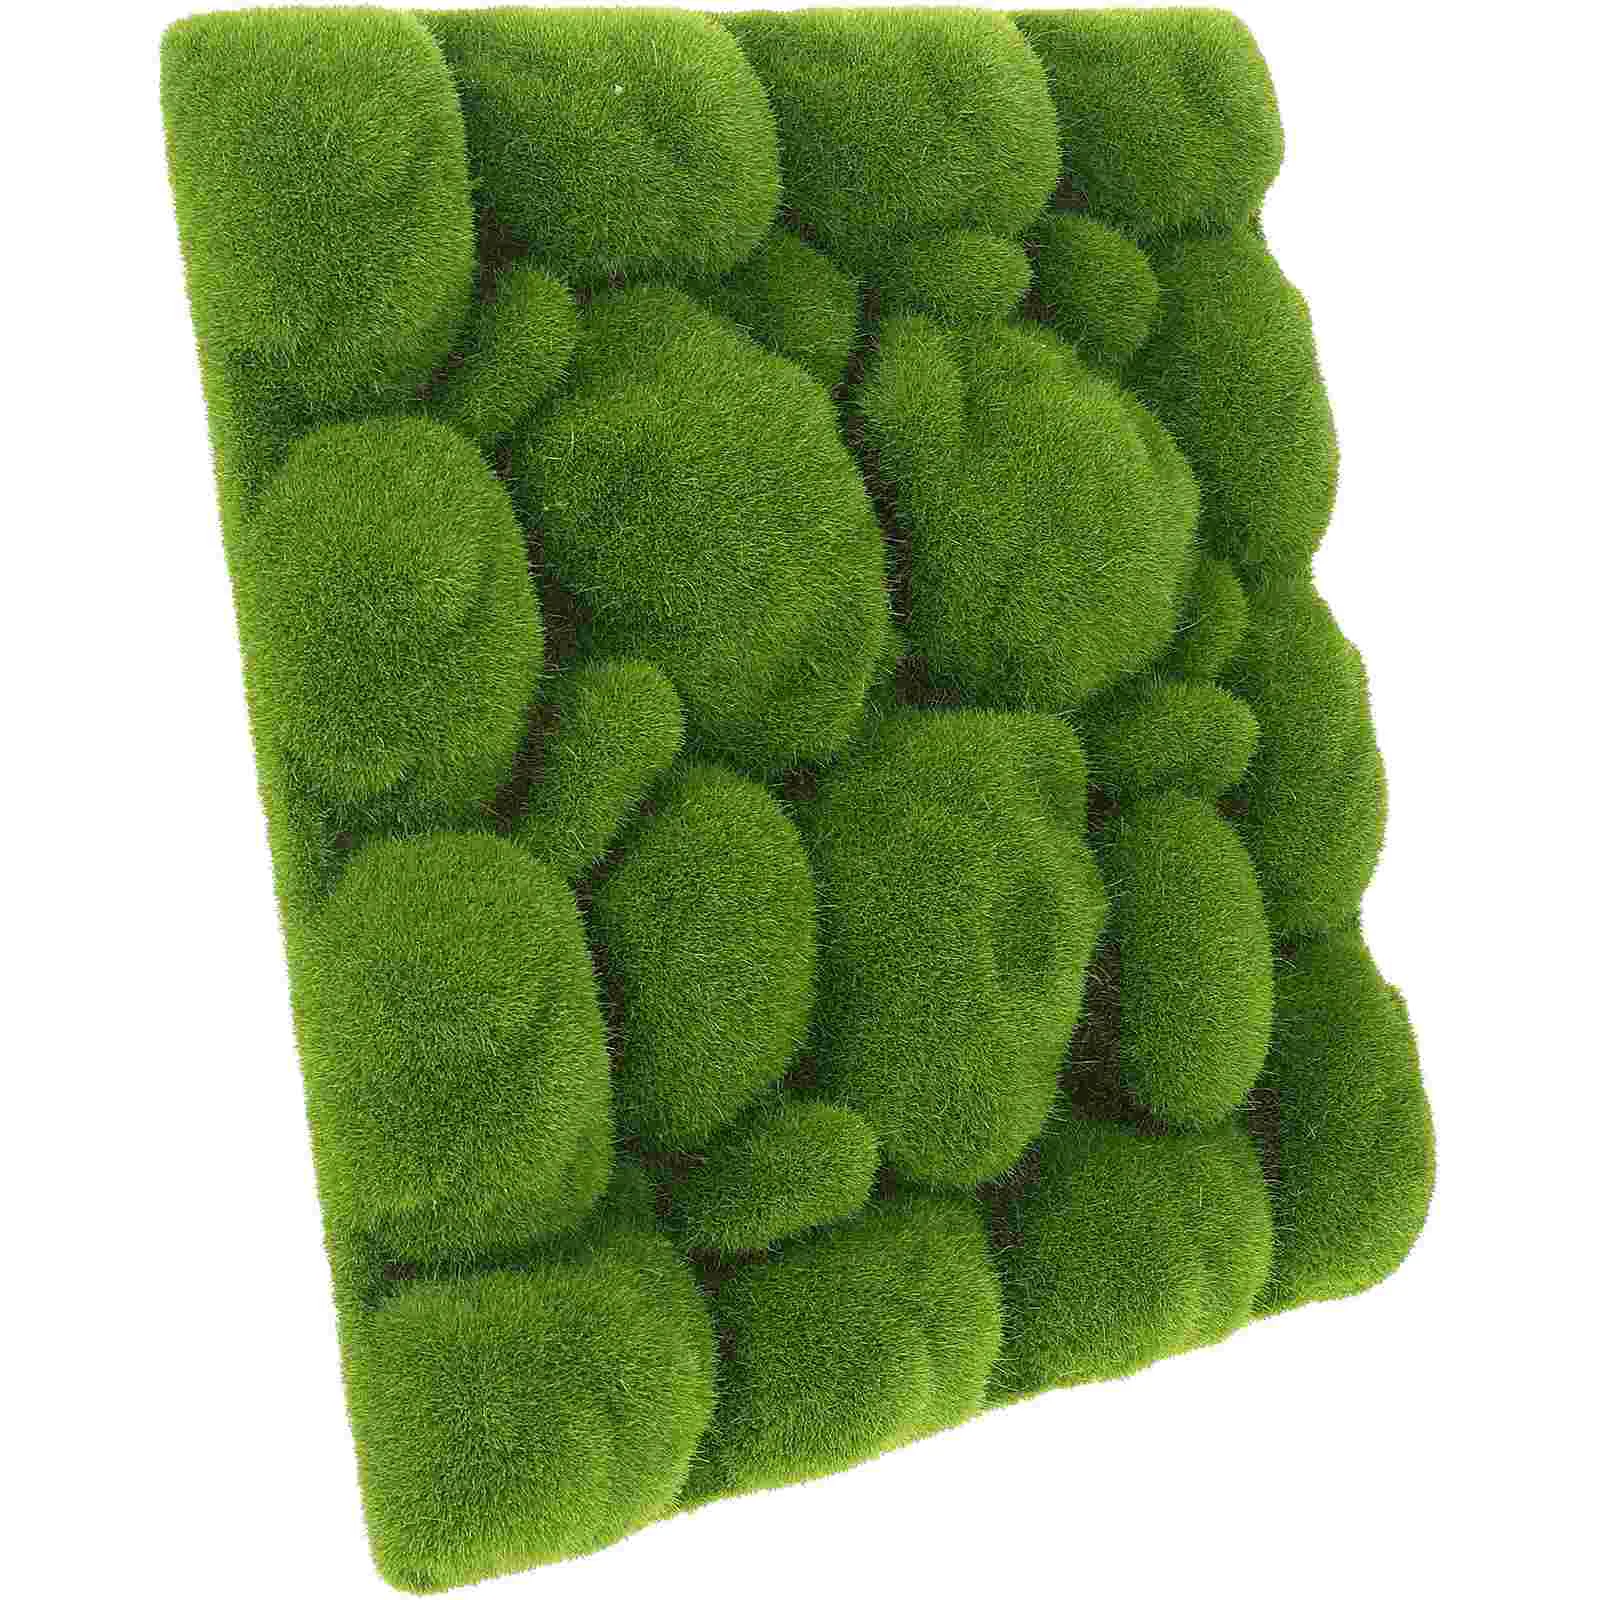 

Wall Artificial Fake Grass Decor Mat Green Board Panels Faux Turf Privacy Decoration Rug Foam Panel Simulation Crafts Hedge